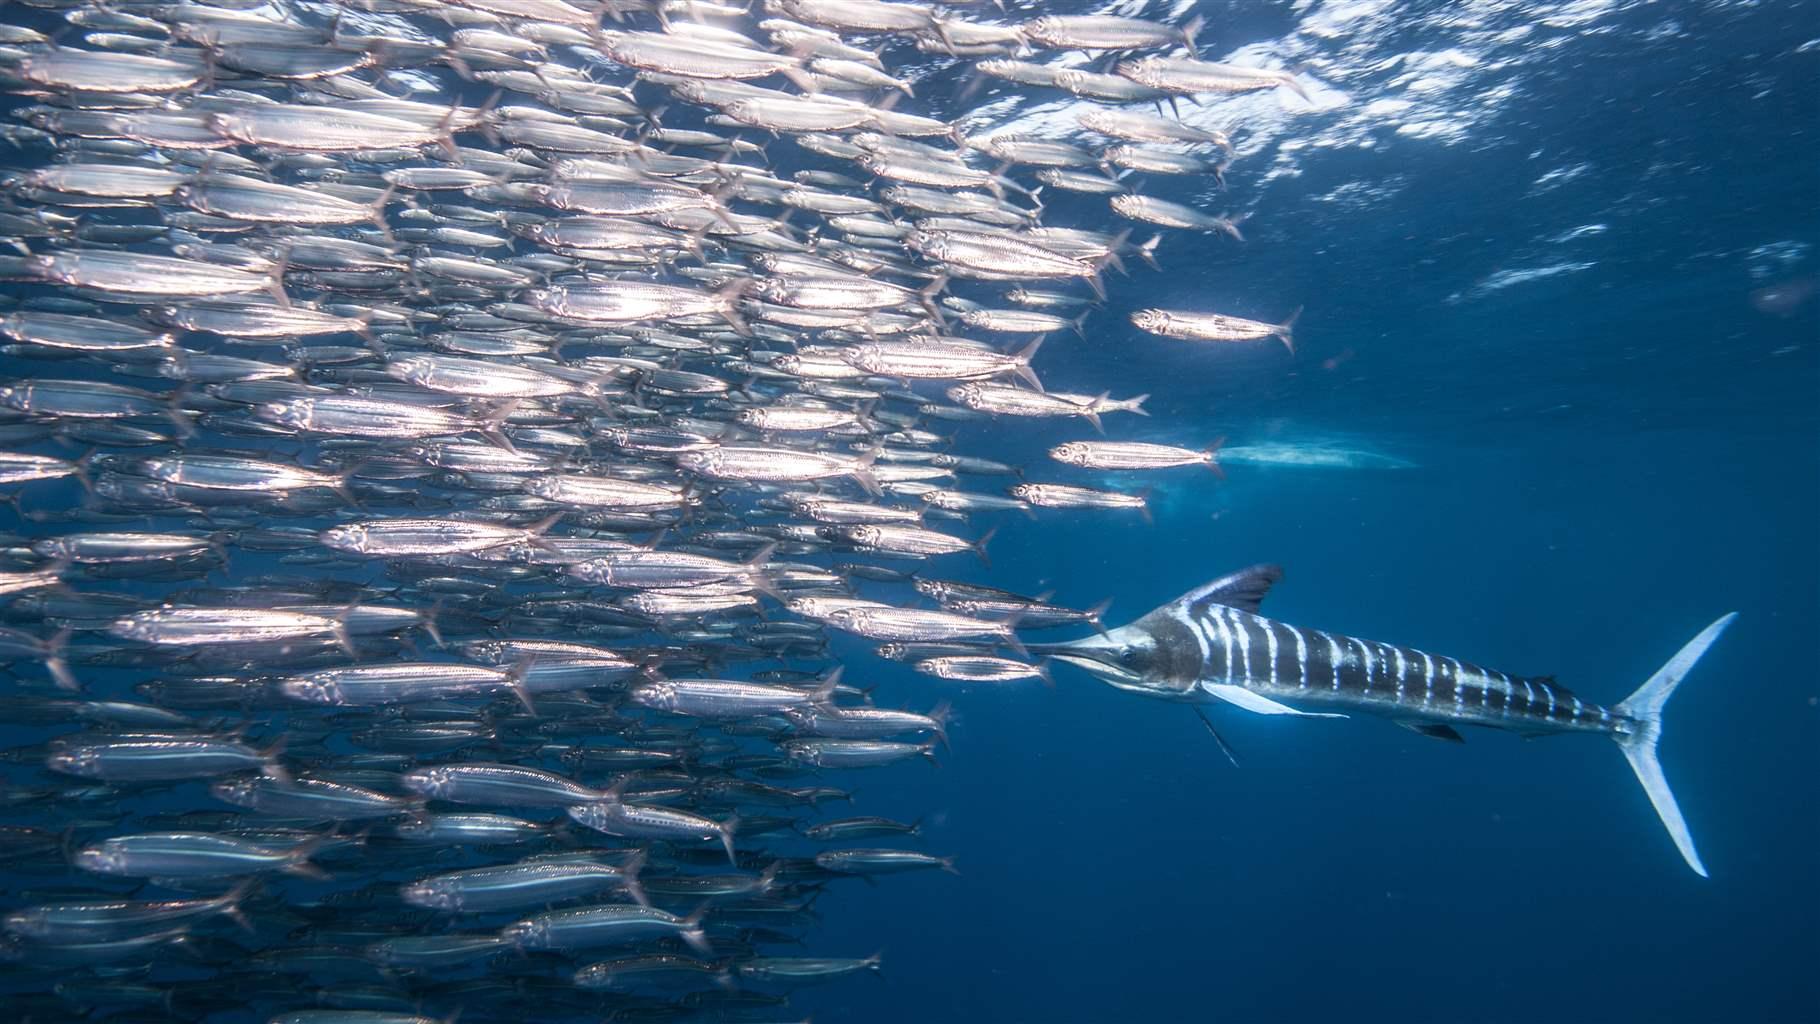 A lined marlin swims around a school of fish